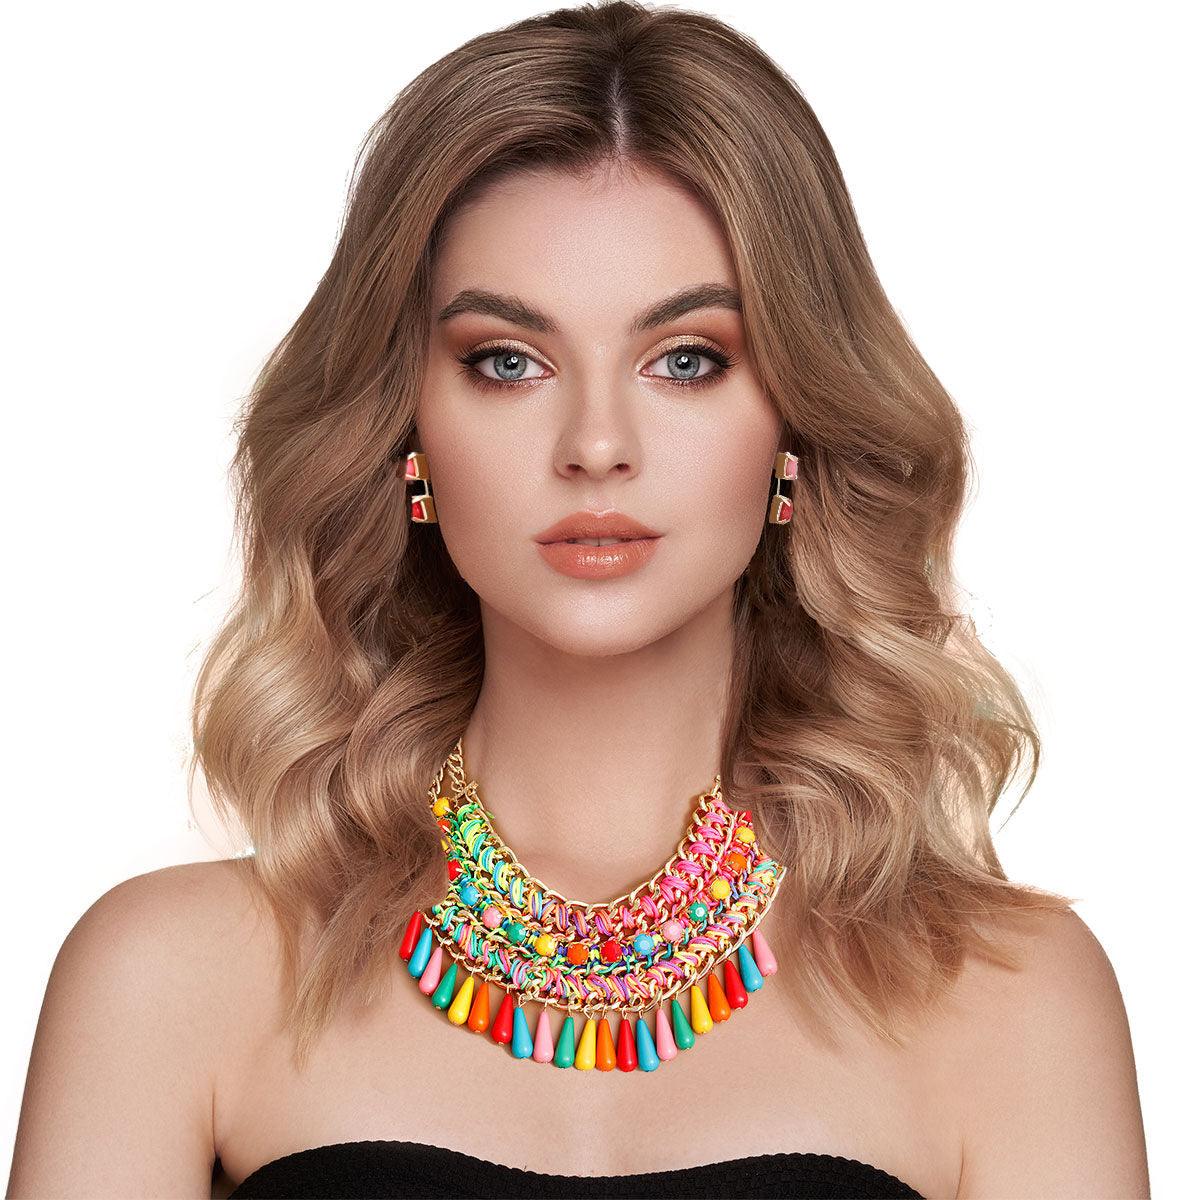 Must-Have Summer Bead Necklace & Earrings Set - Vibrant Colors Await!